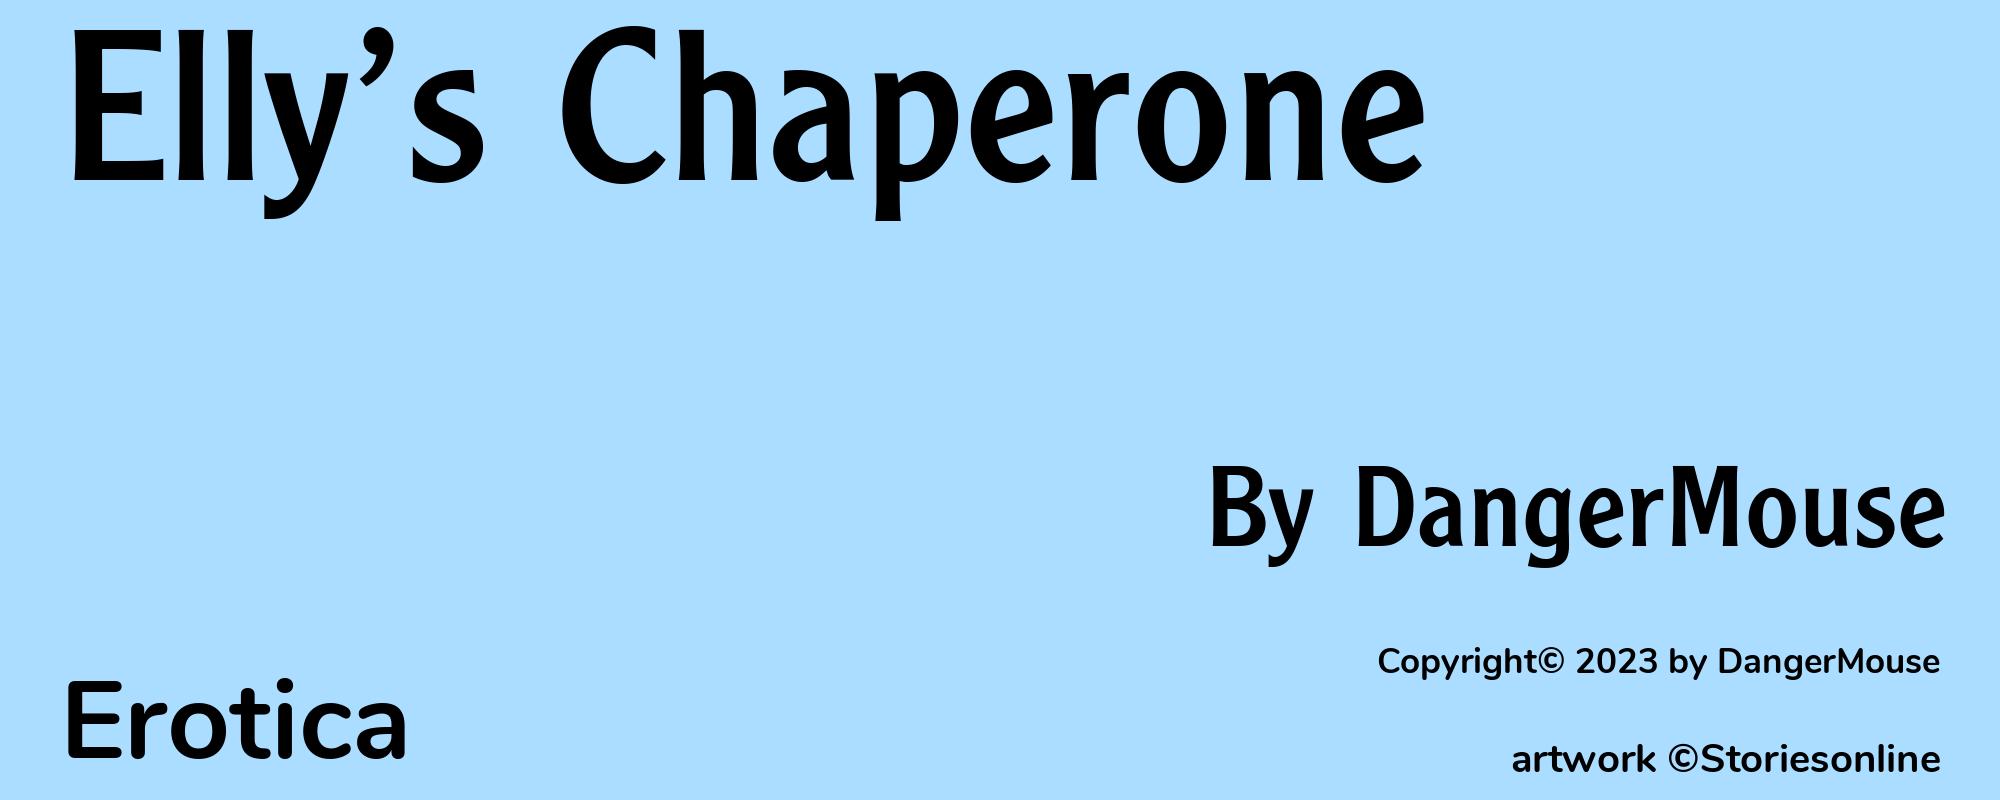 Elly’s Chaperone - Cover